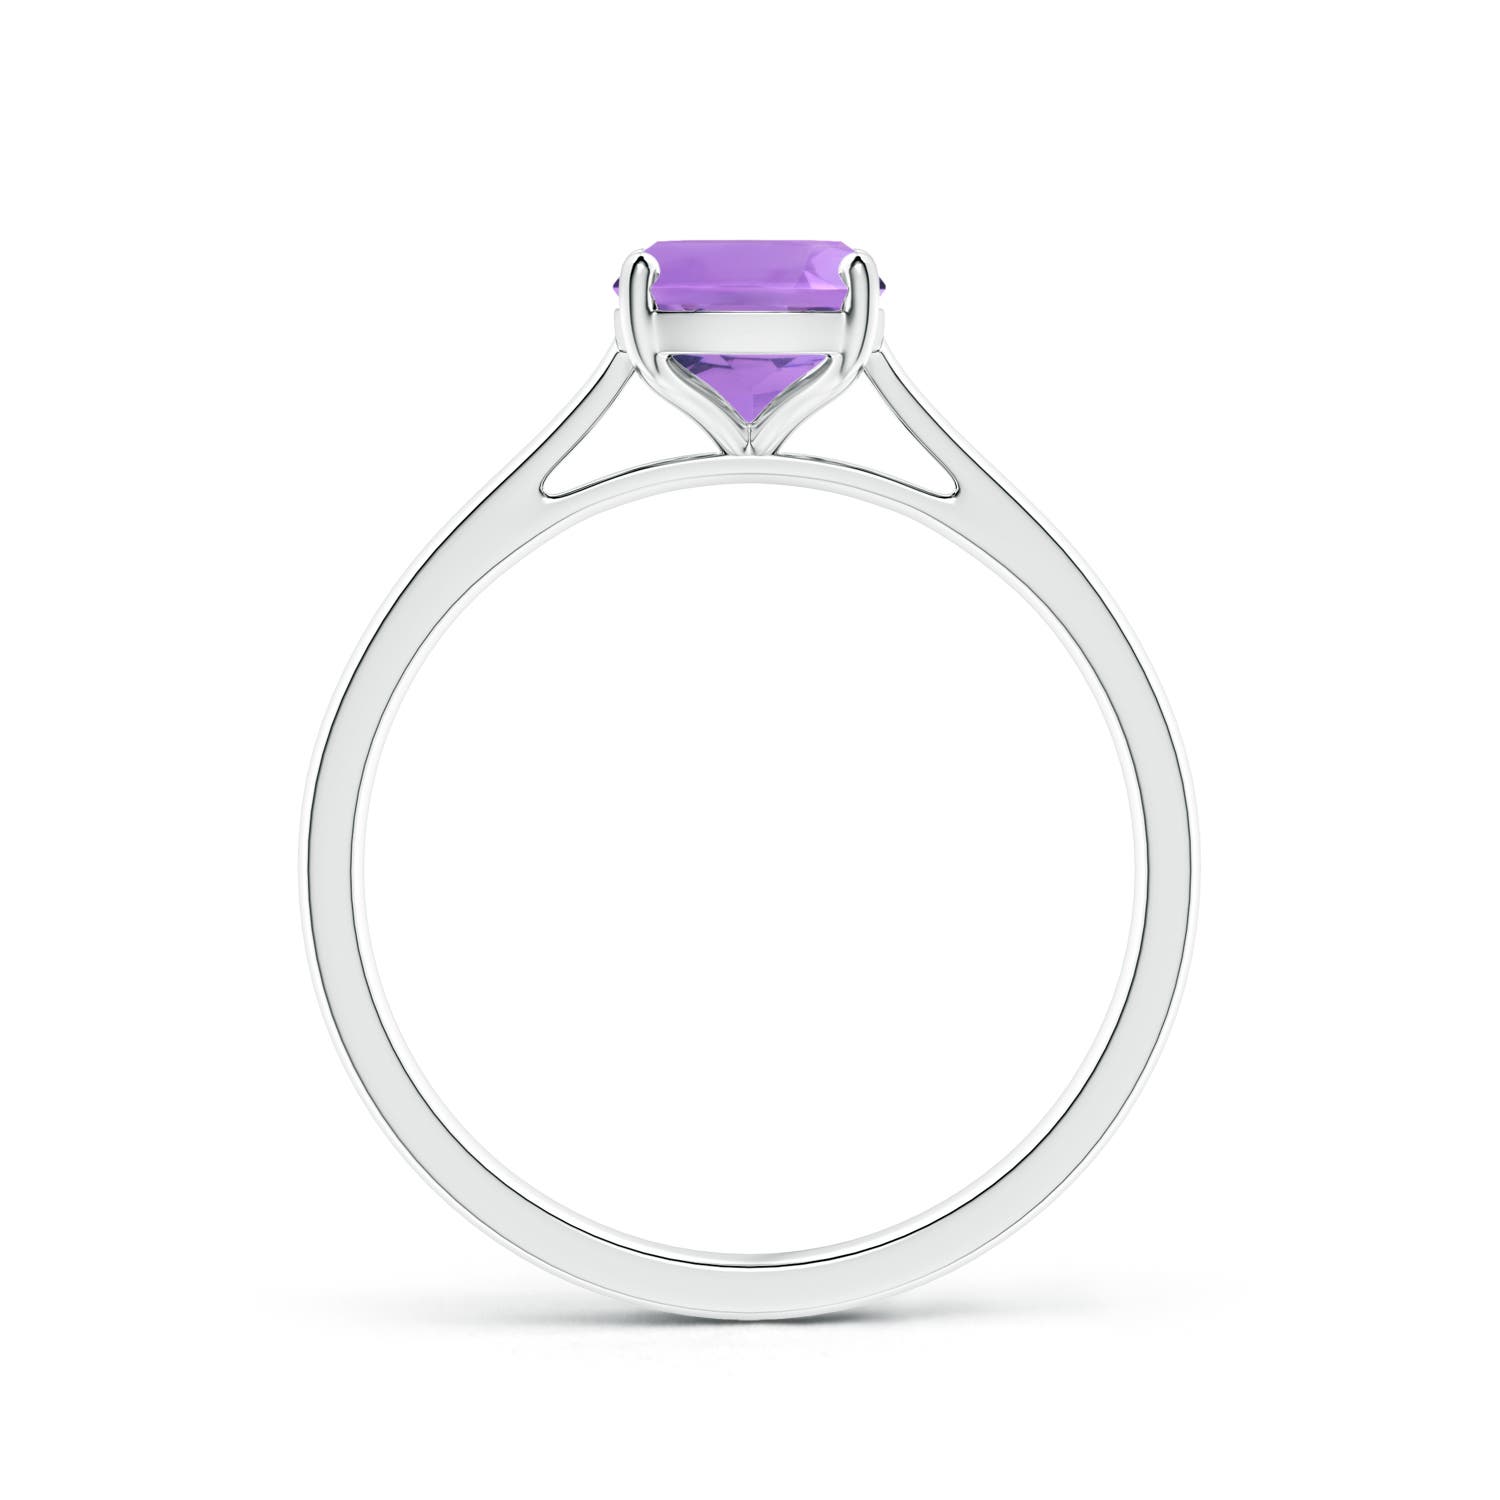 A - Amethyst / 1.2 CT / 14 KT White Gold